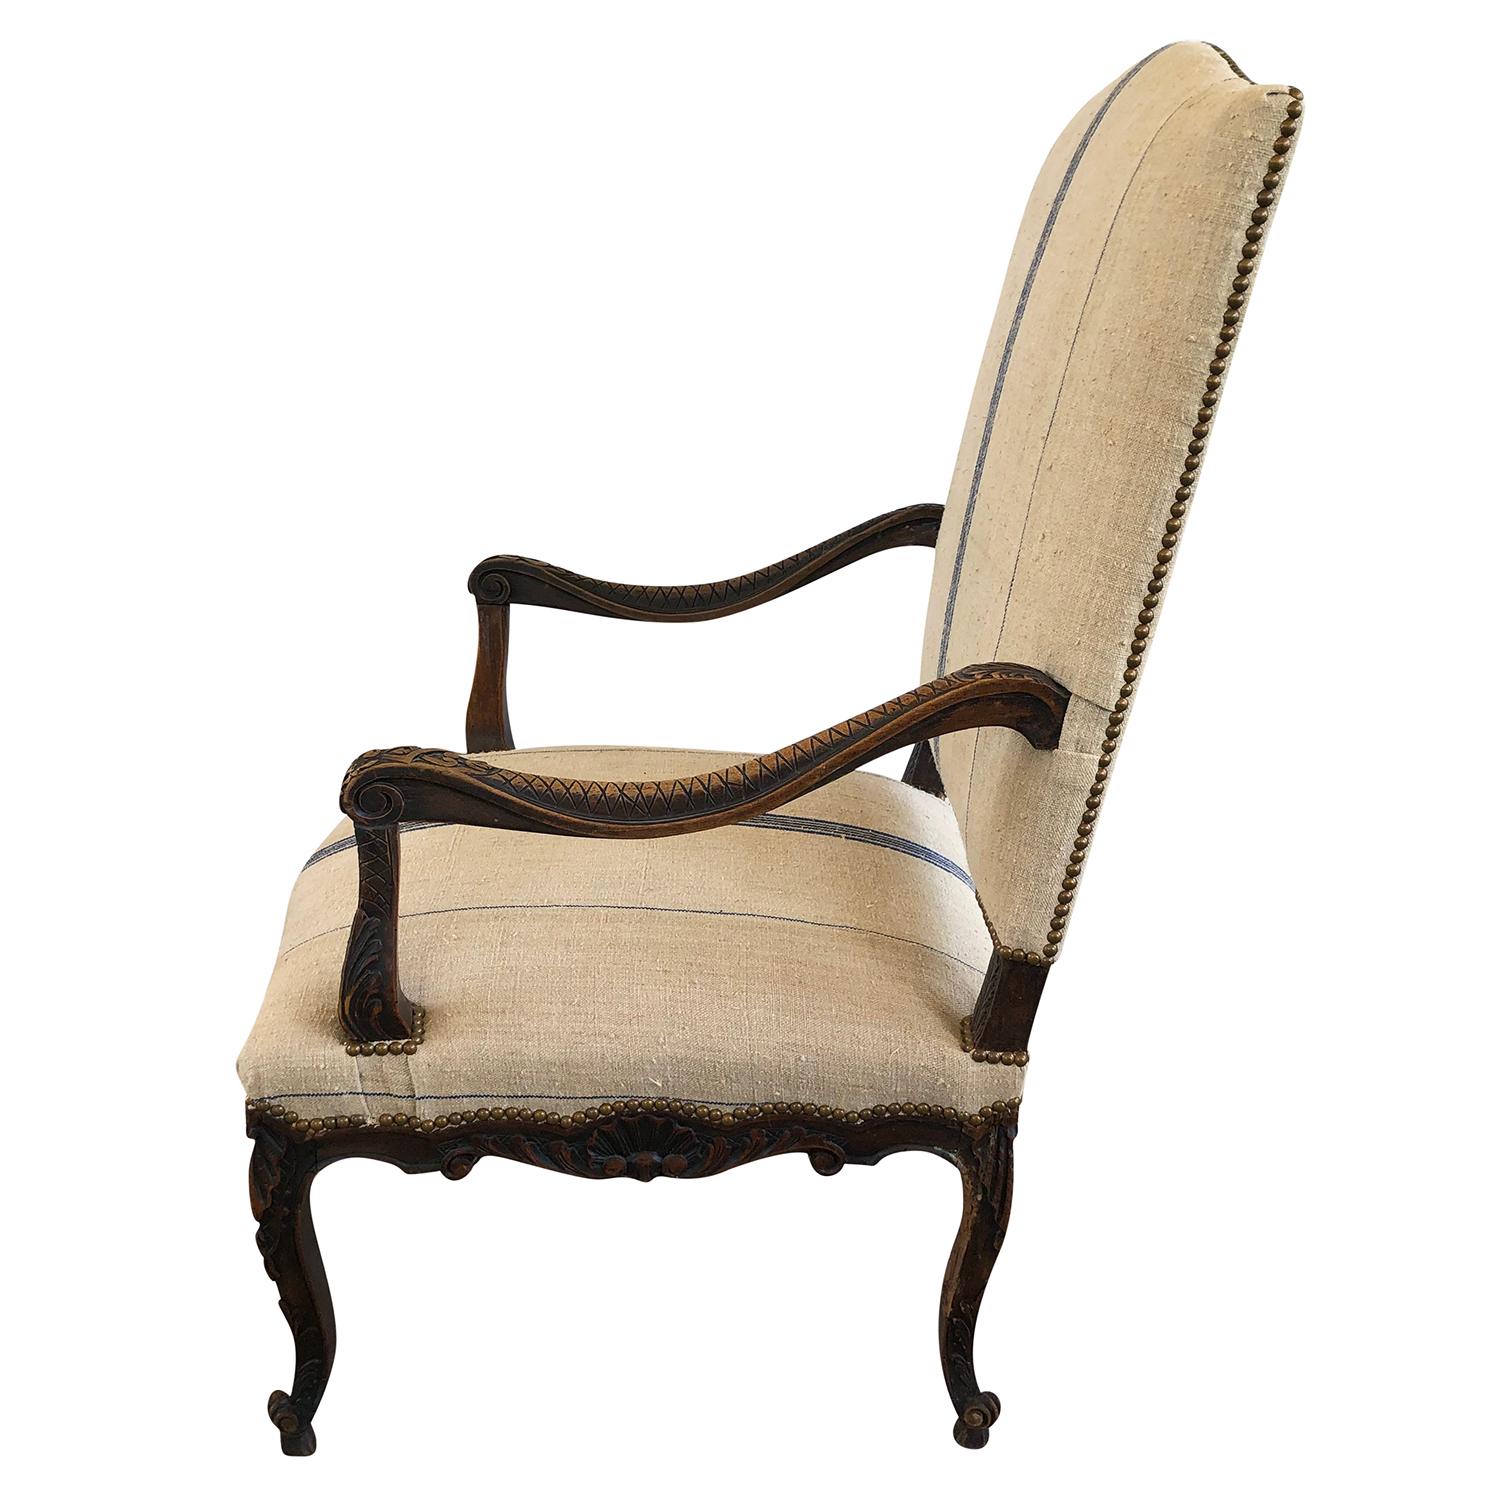 18th Century and Earlier 18th Century Régence Fauteuil, Antique French Beechwood, Brass Armchair